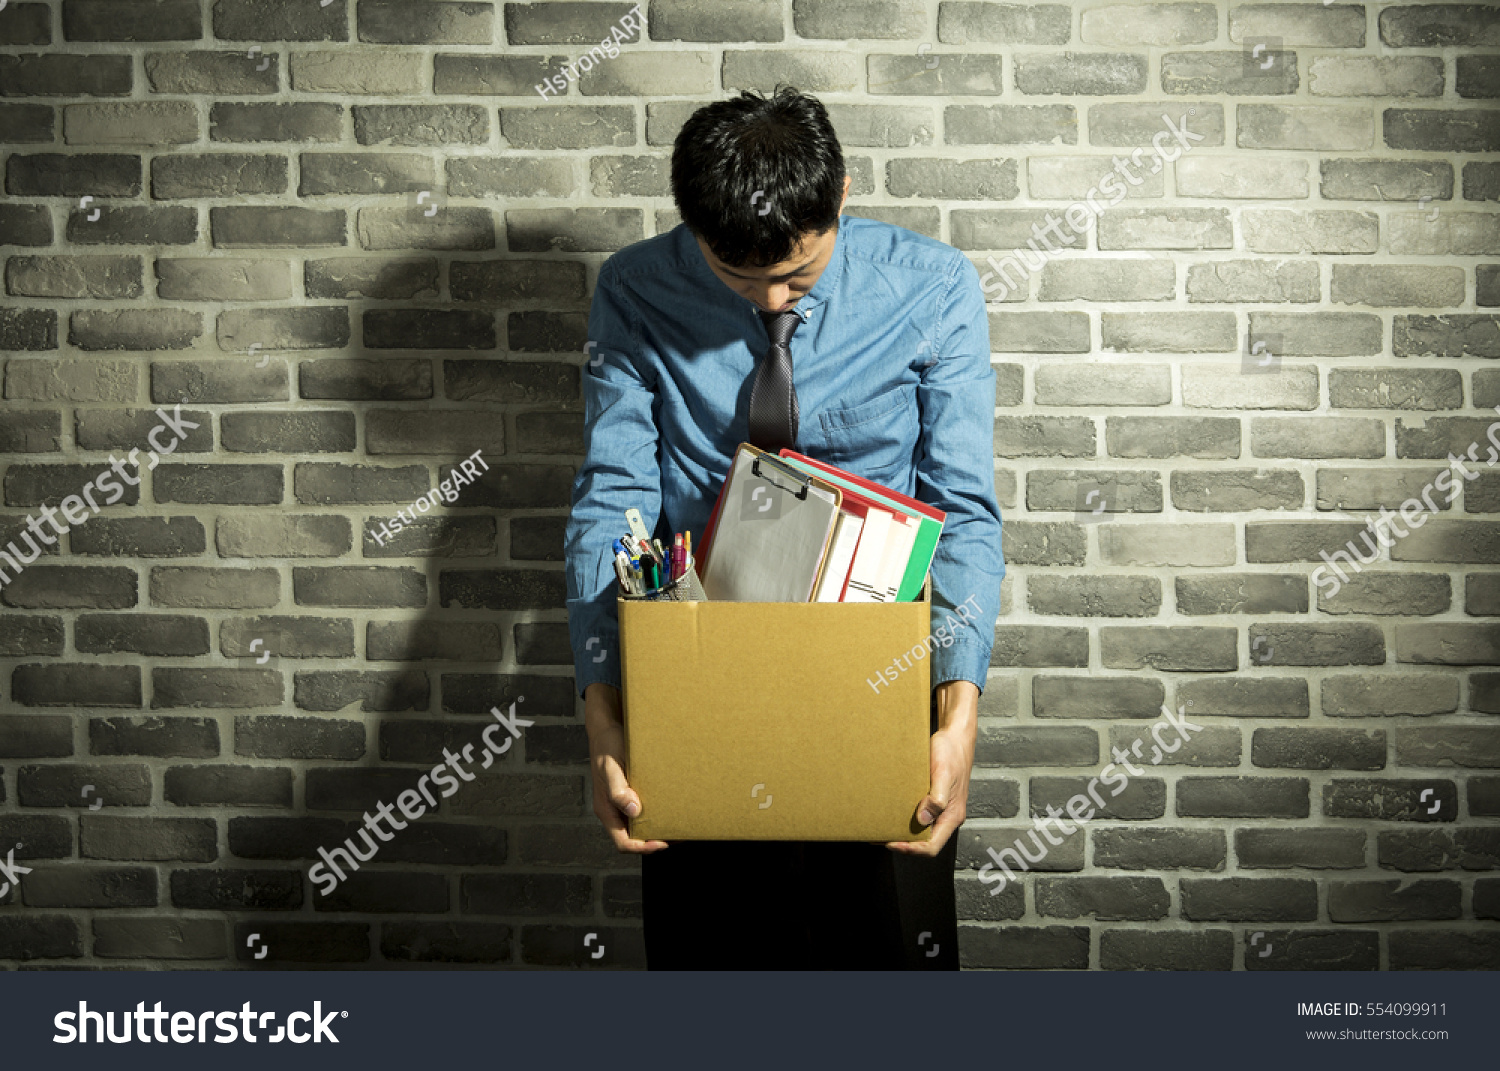 depressed man holding box in his hands, with office supplies inside, wall background #554099911